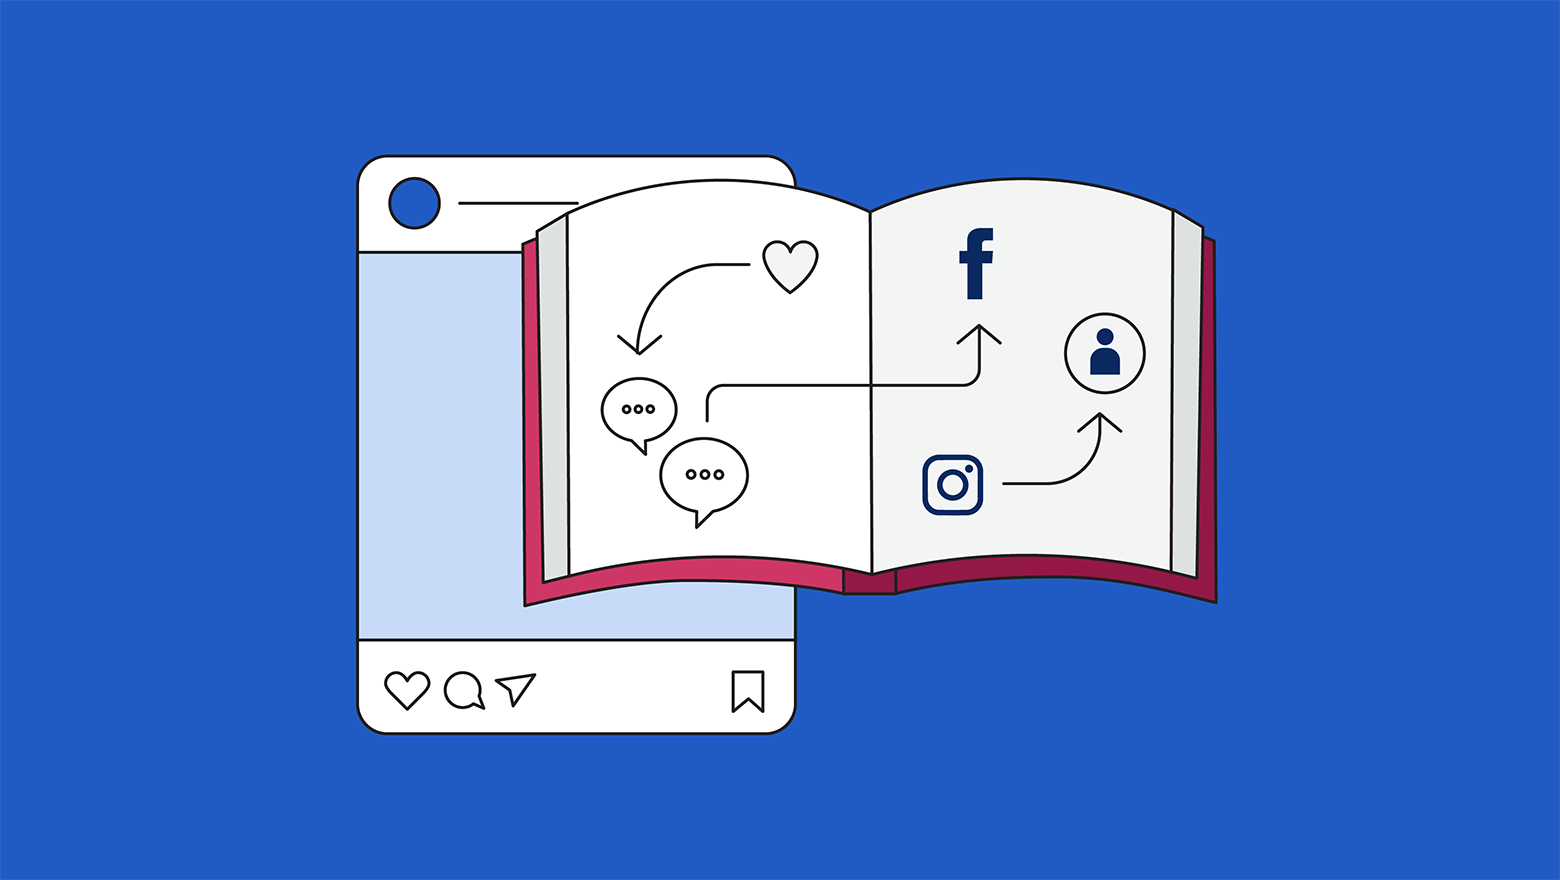 A graphic of a social post and a book containing social media symbols and icons to represent a social media training playbook to share with colleagues.